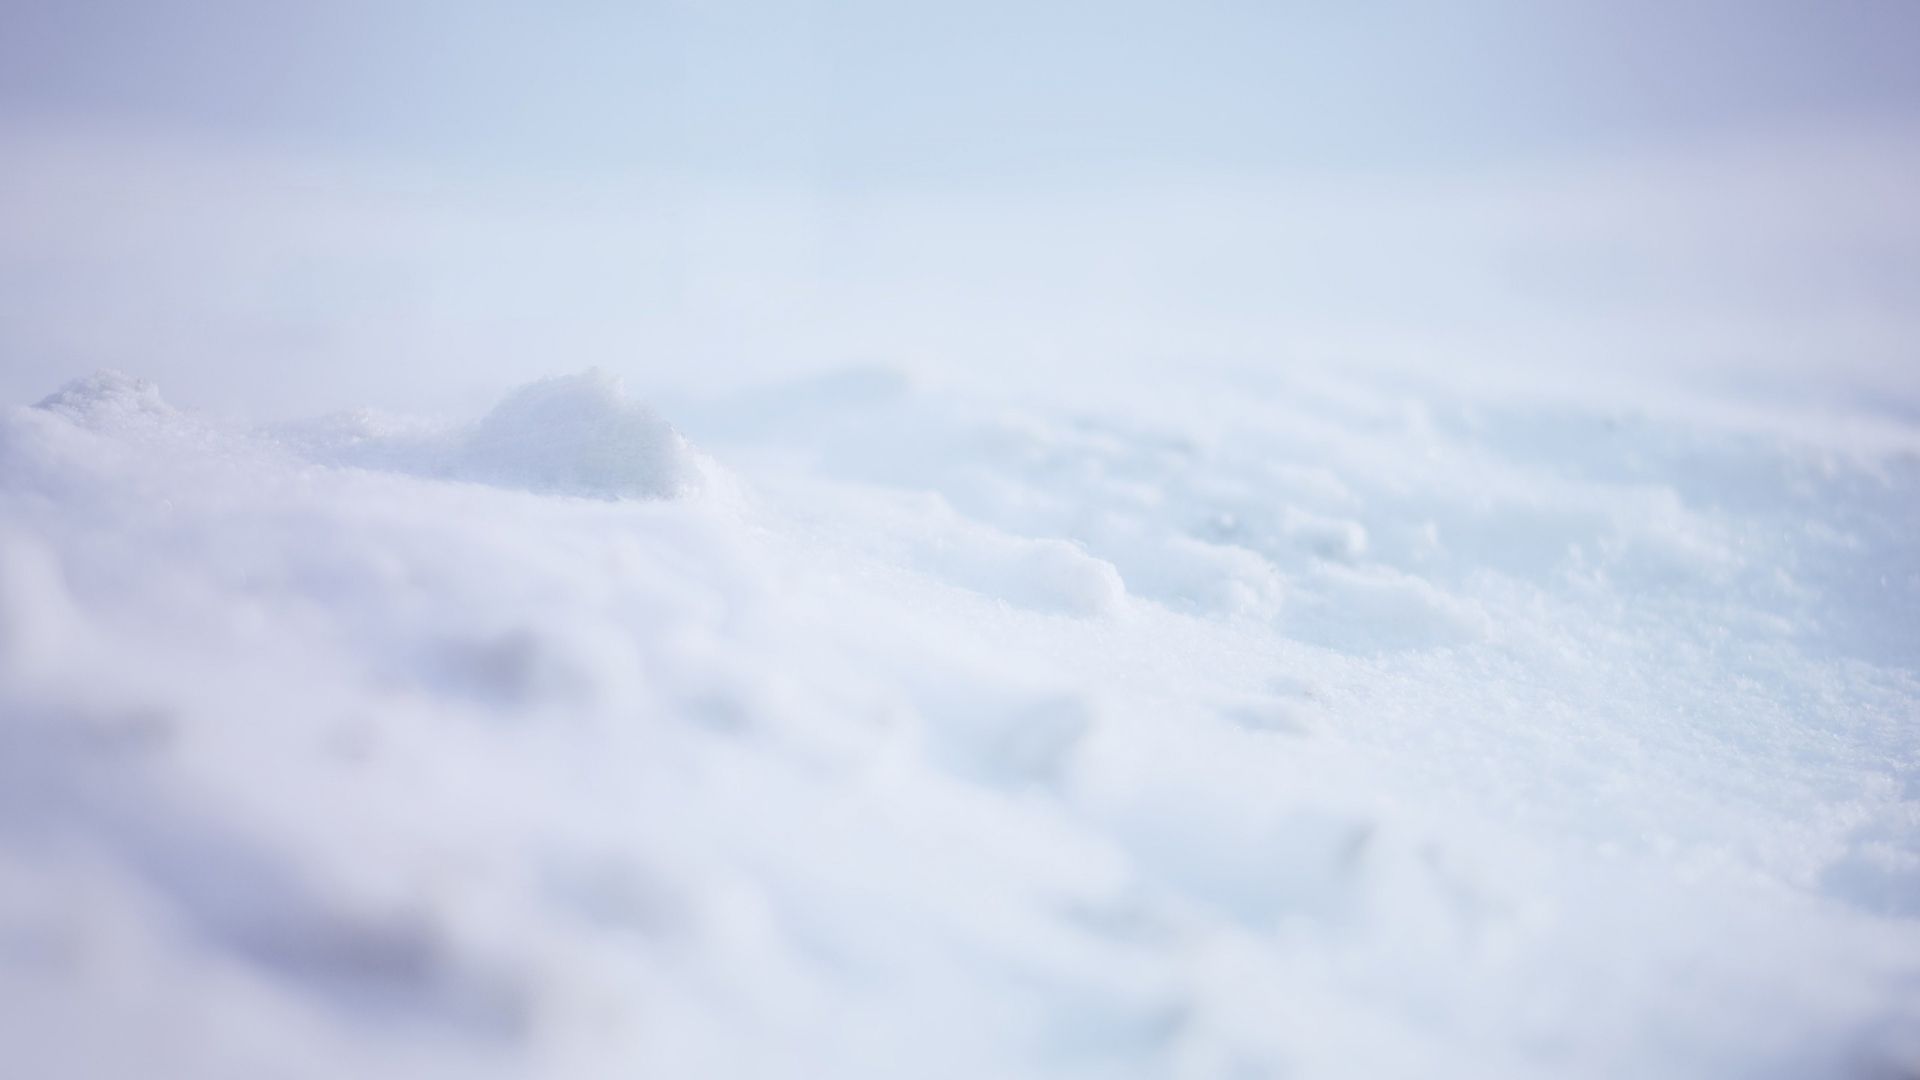 Download Wallpaper 1920x1080 snow, white, background, surface Full